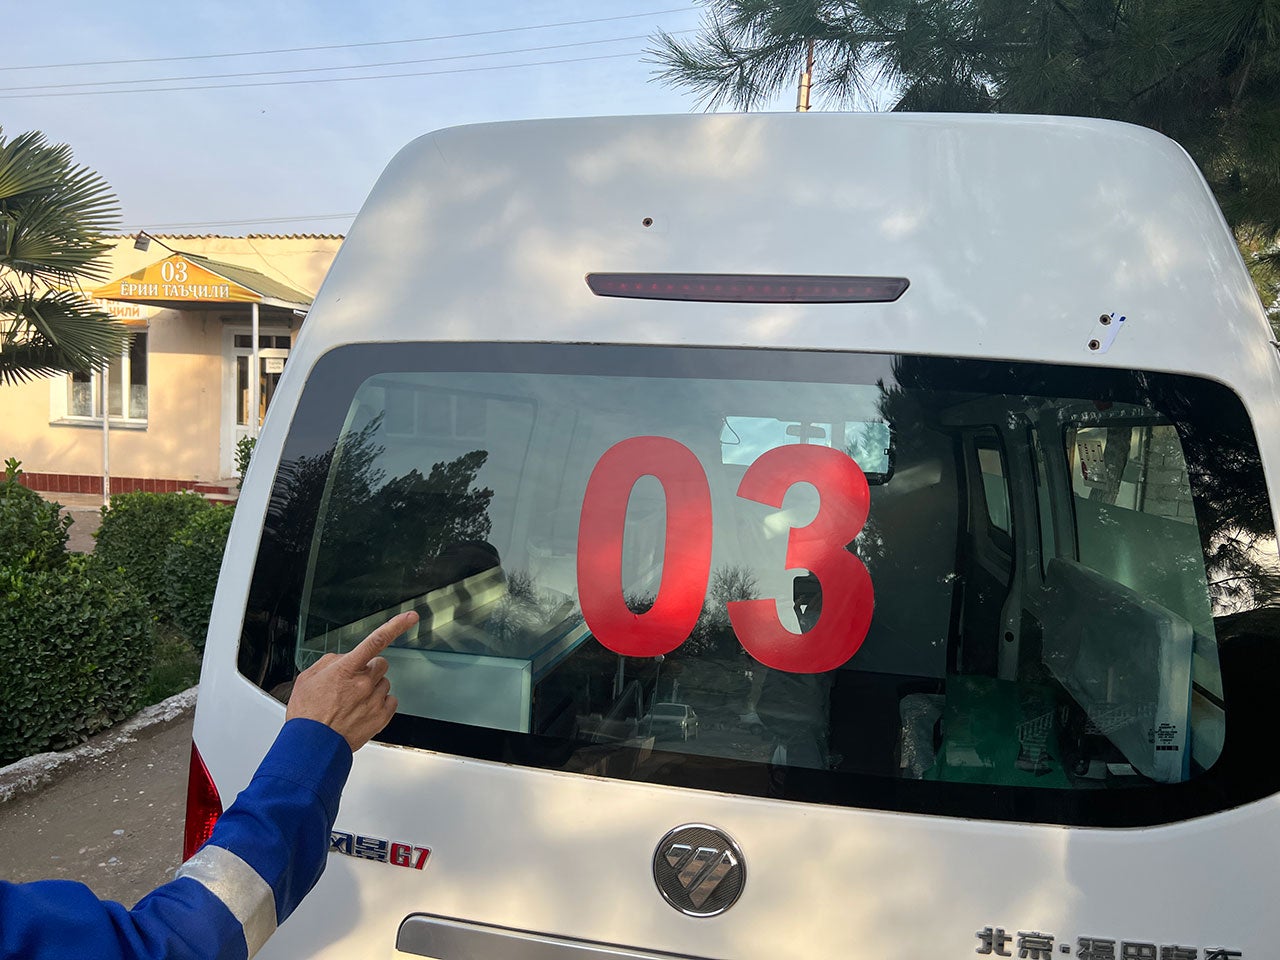 Bullet impacts on a Tajik ambulance from Ungi Hospital which came under attack by Kyrgyz forces on September 16 in Ovchi Kal’acha. The attack killed two health workers. 